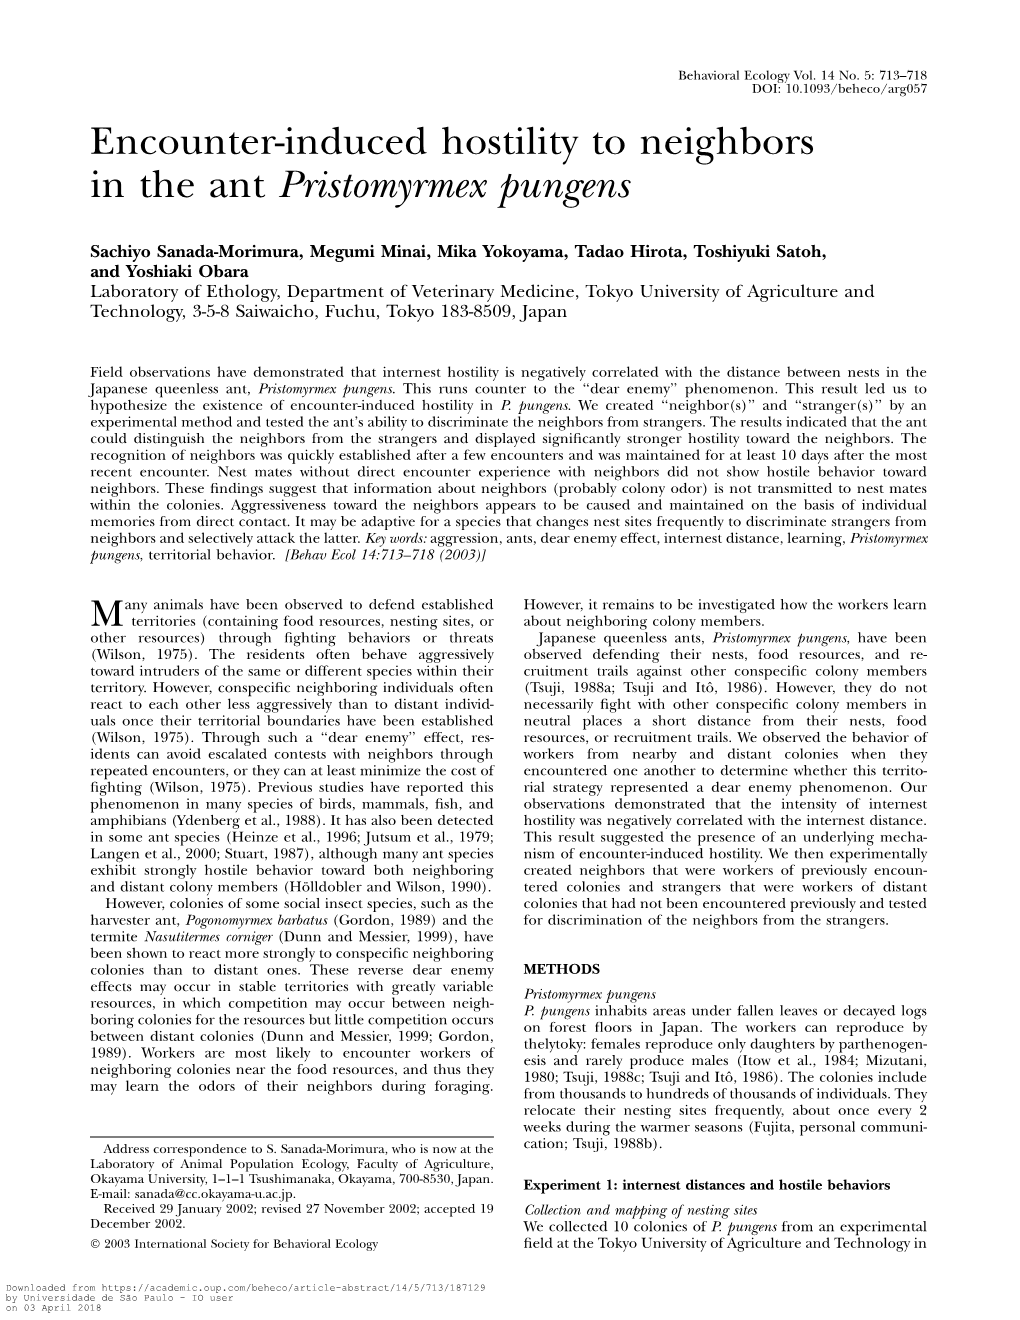 Encounter-Induced Hostility to Neighbors in the Ant Pristomyrmex Pungens